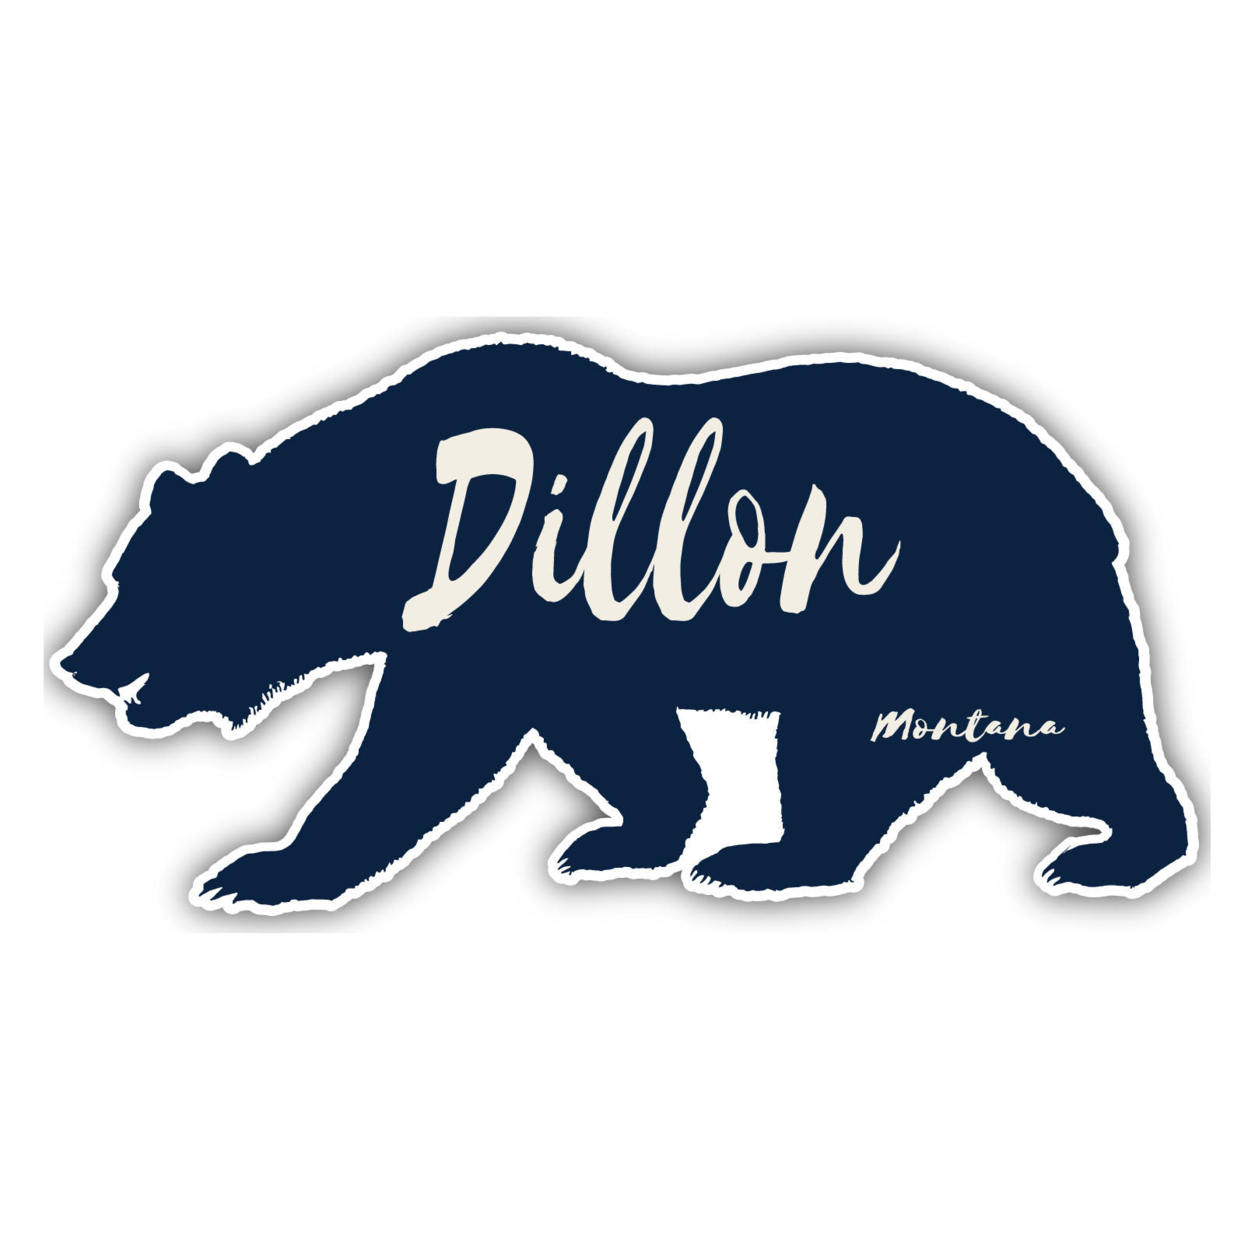 Dillon Montana Souvenir Decorative Stickers (Choose Theme And Size) - 4-Pack, 6-Inch, Camp Life